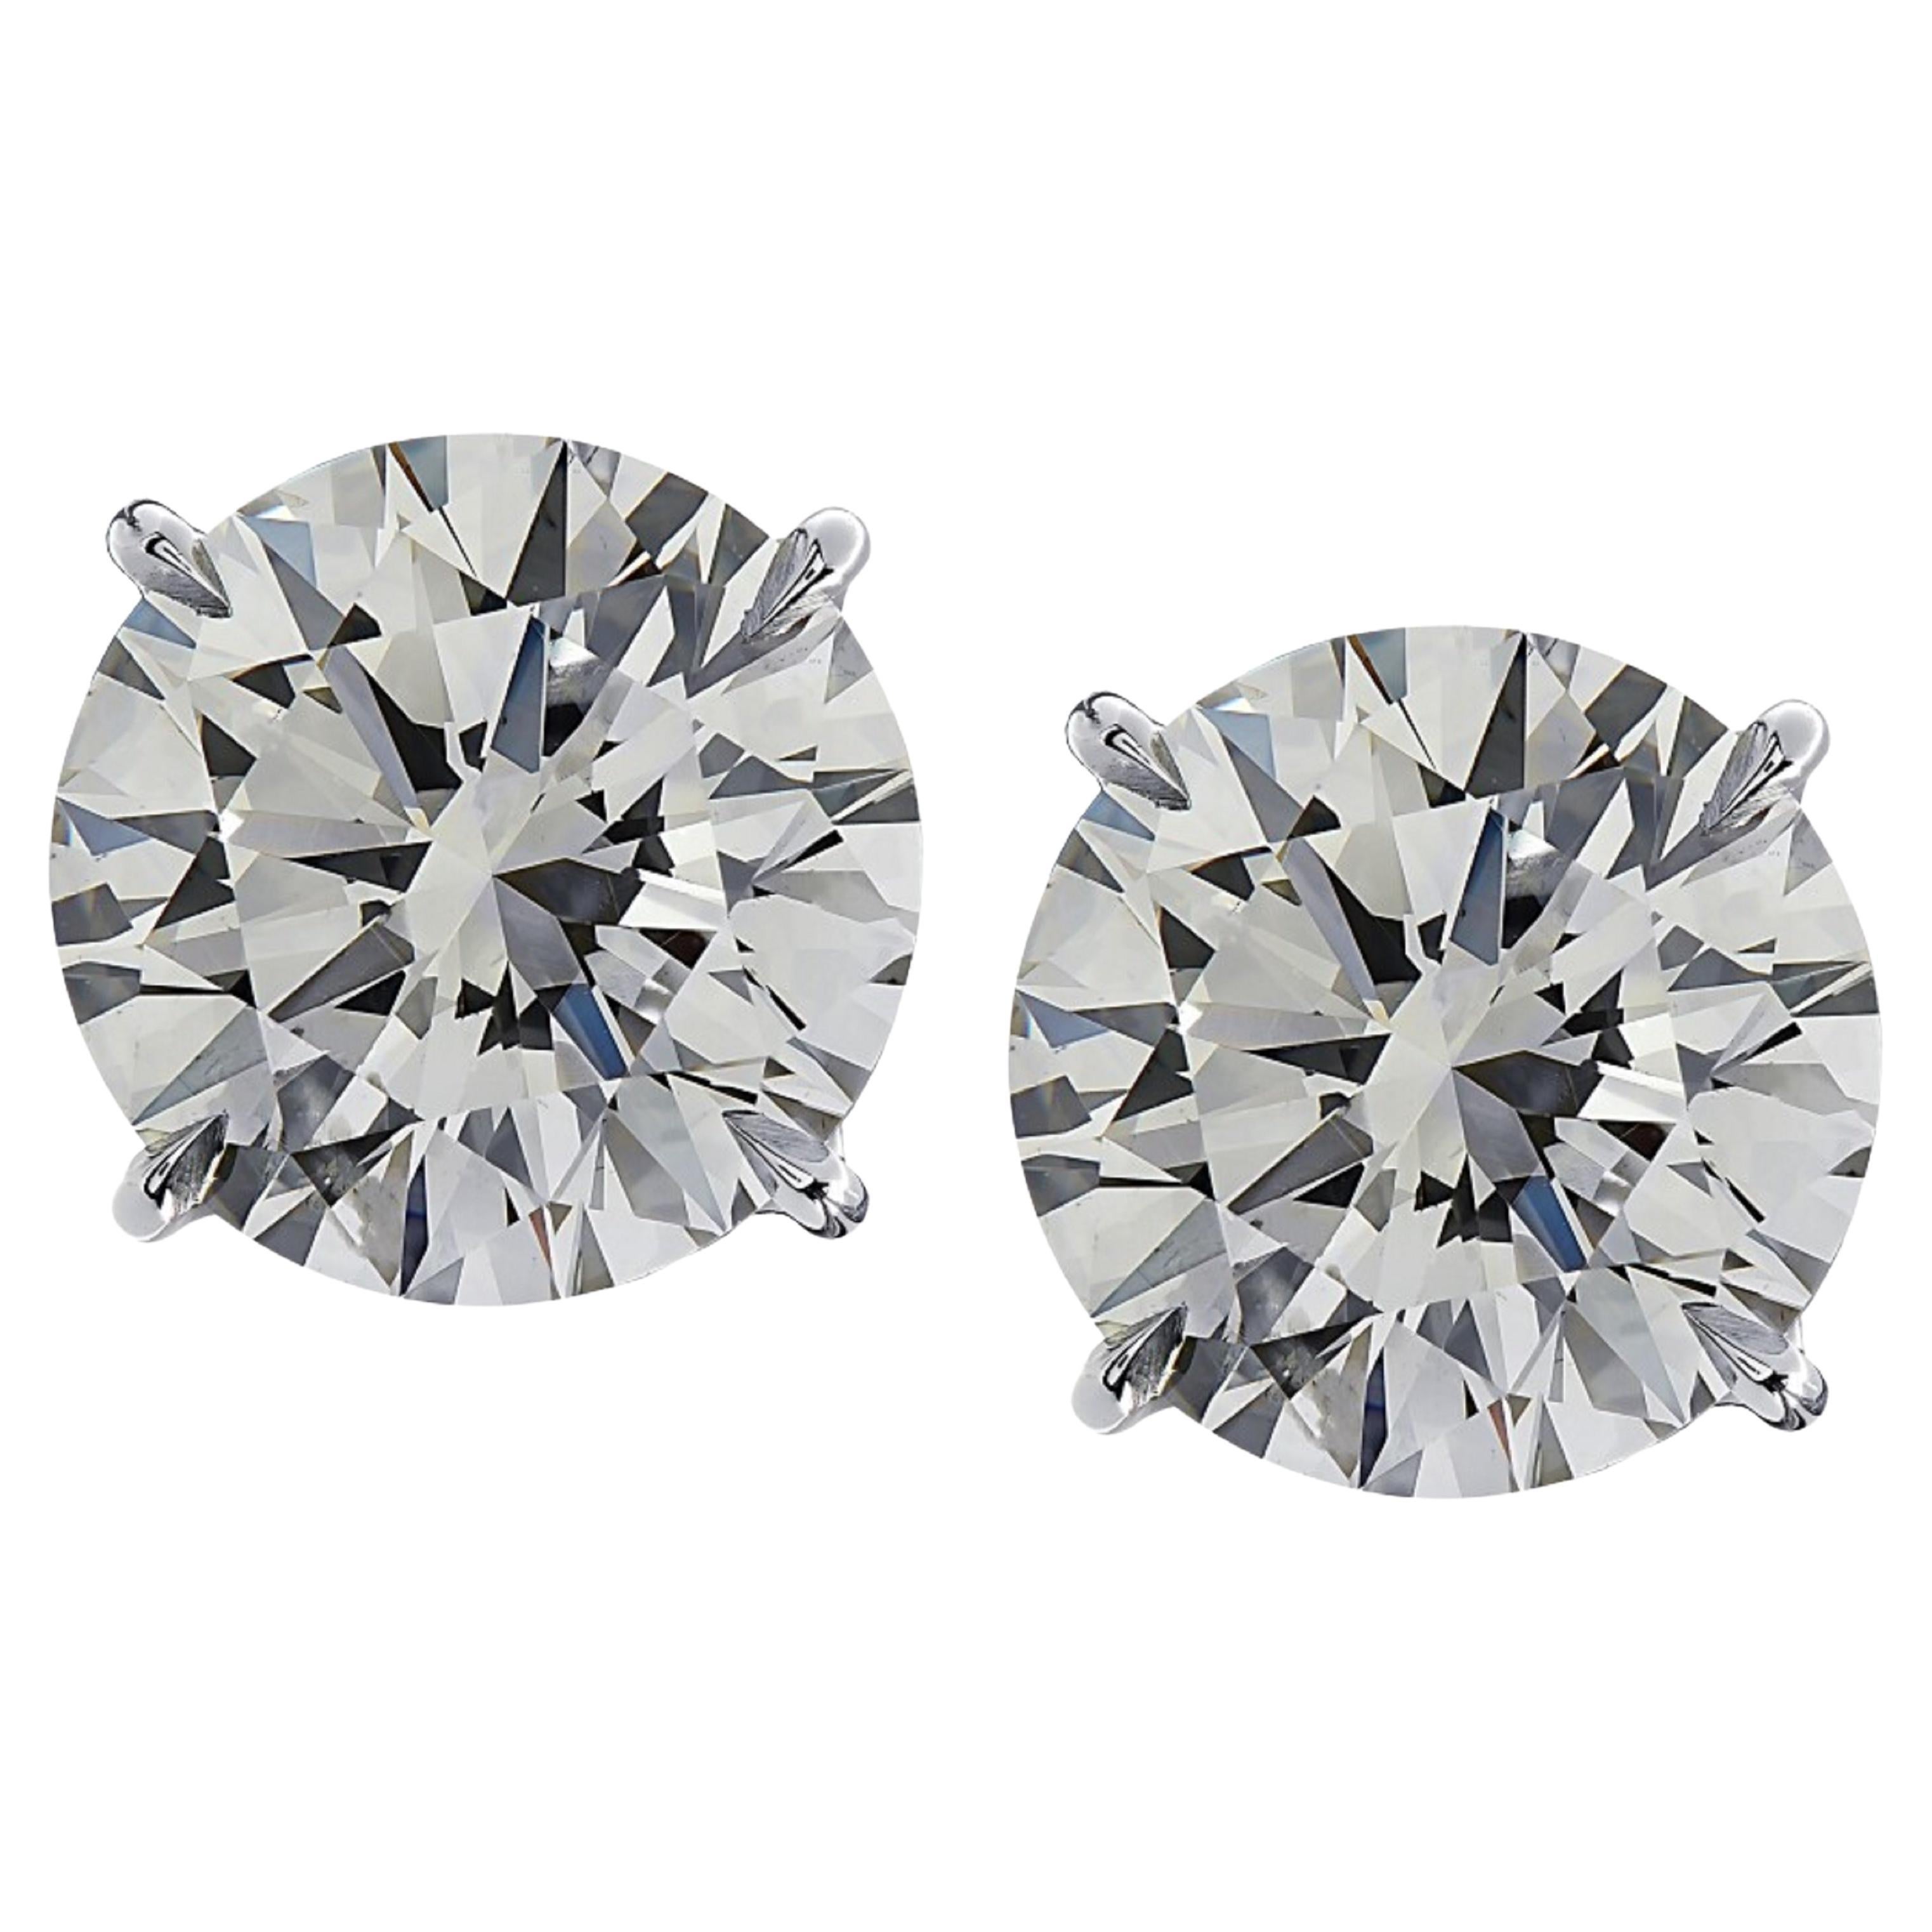 6 Carat Matched Pair of Round Cut Diamonds set in solid Platinum For Sale